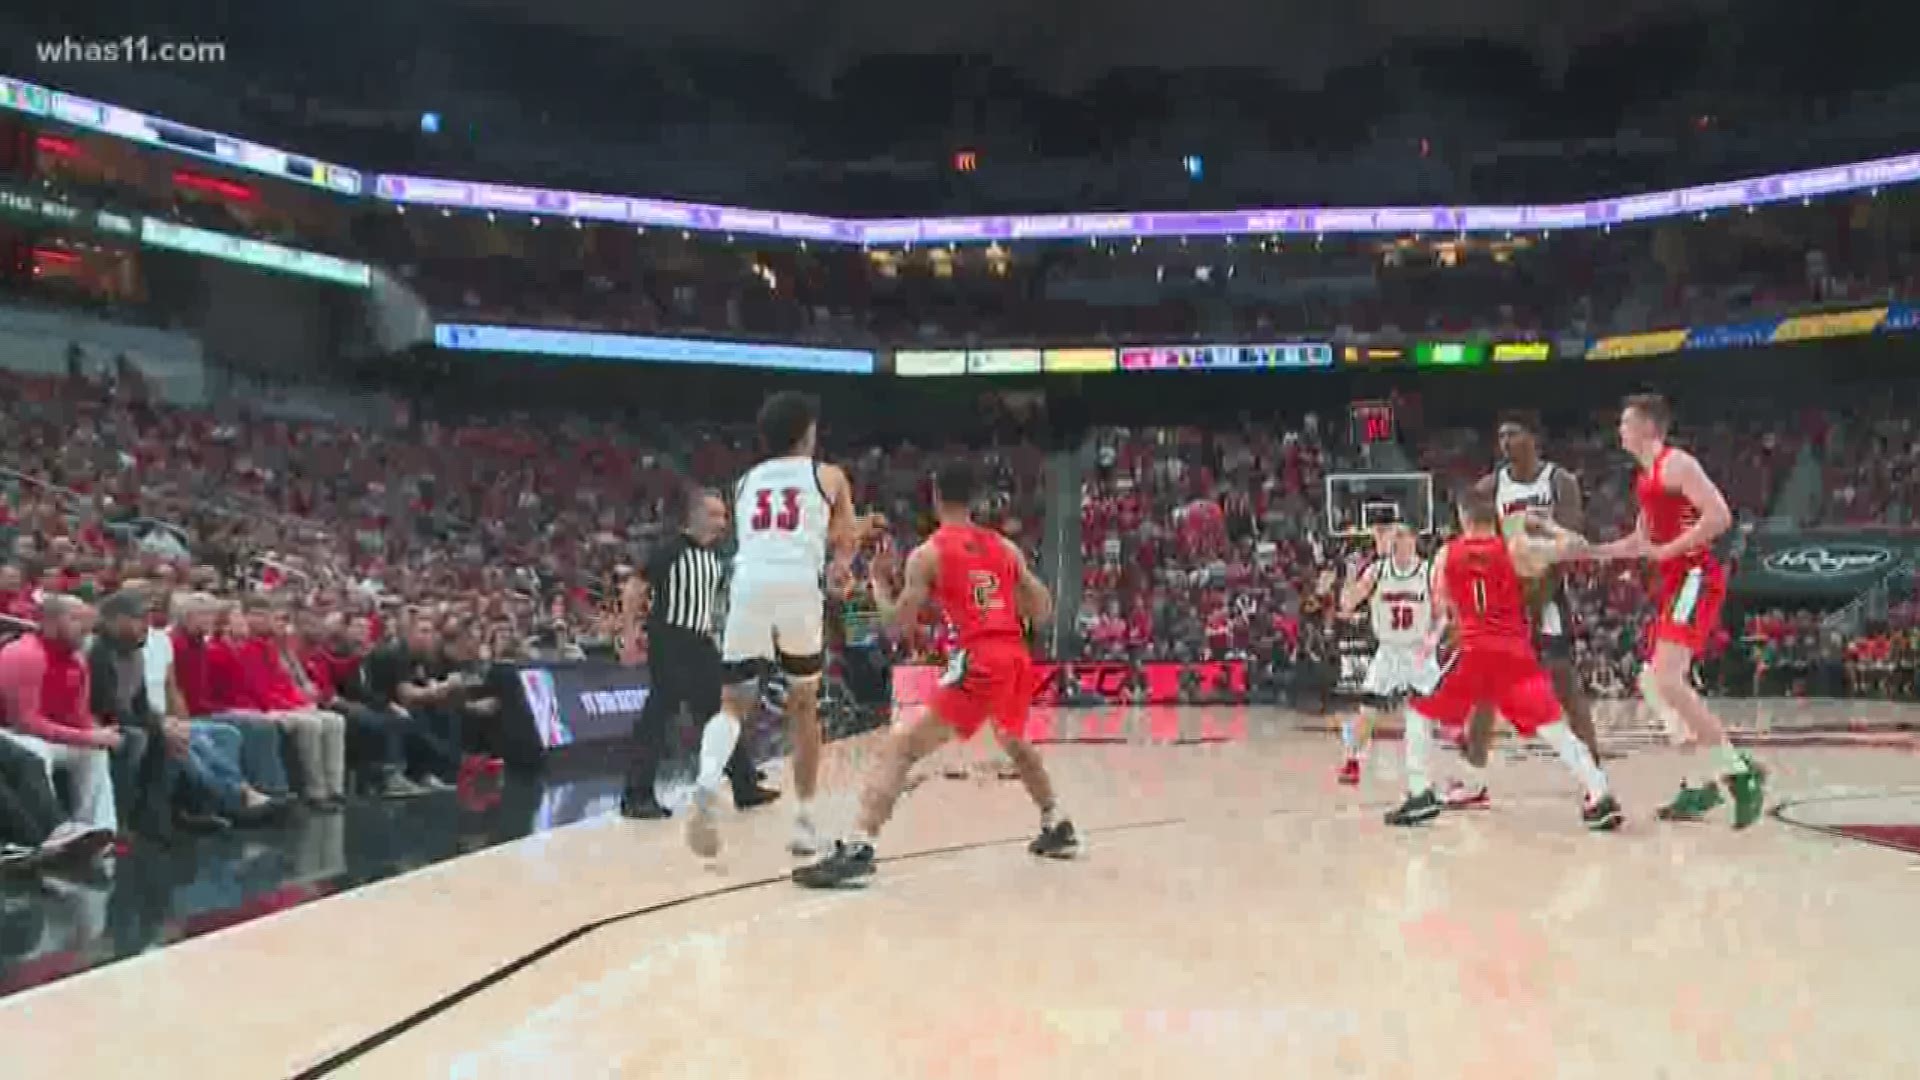 WHAS11 Sports Director Kent Spencer recaps the Cardinals 74-58 win at the KFC Yum! Center against Miami.